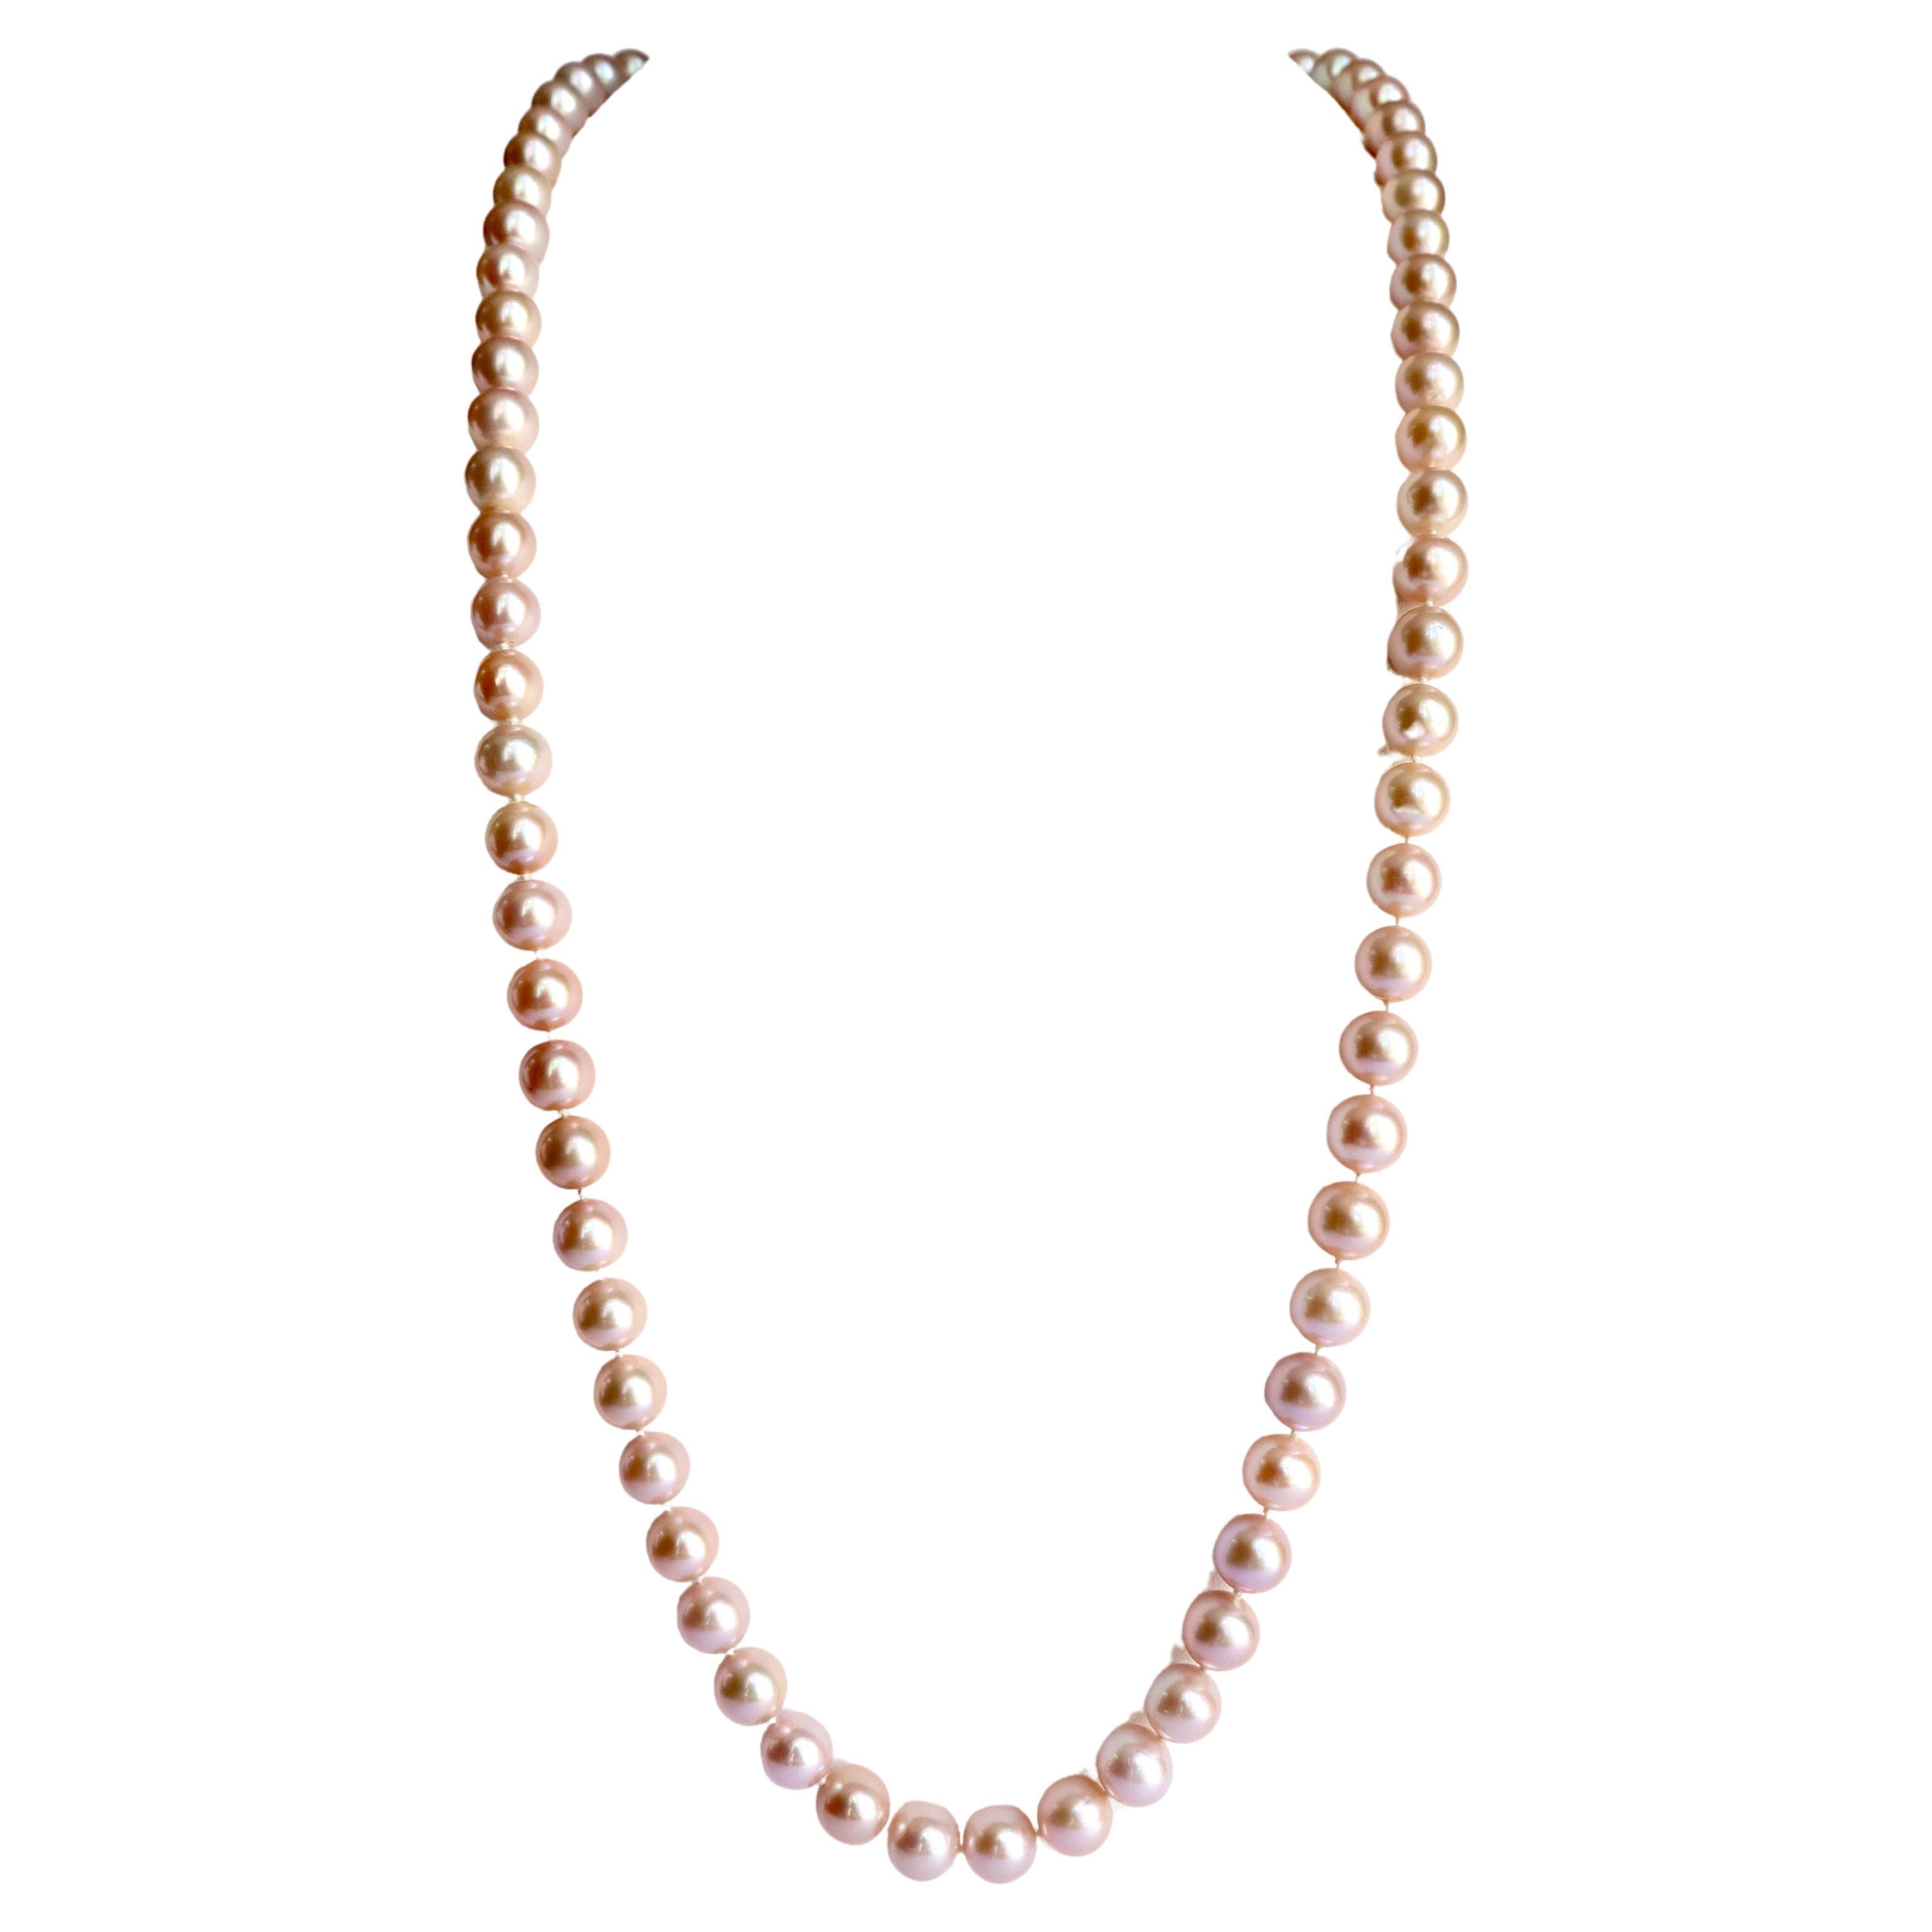 Long Necklace of Pink Cultured Pearls 10.5 to 11mm 84 cm